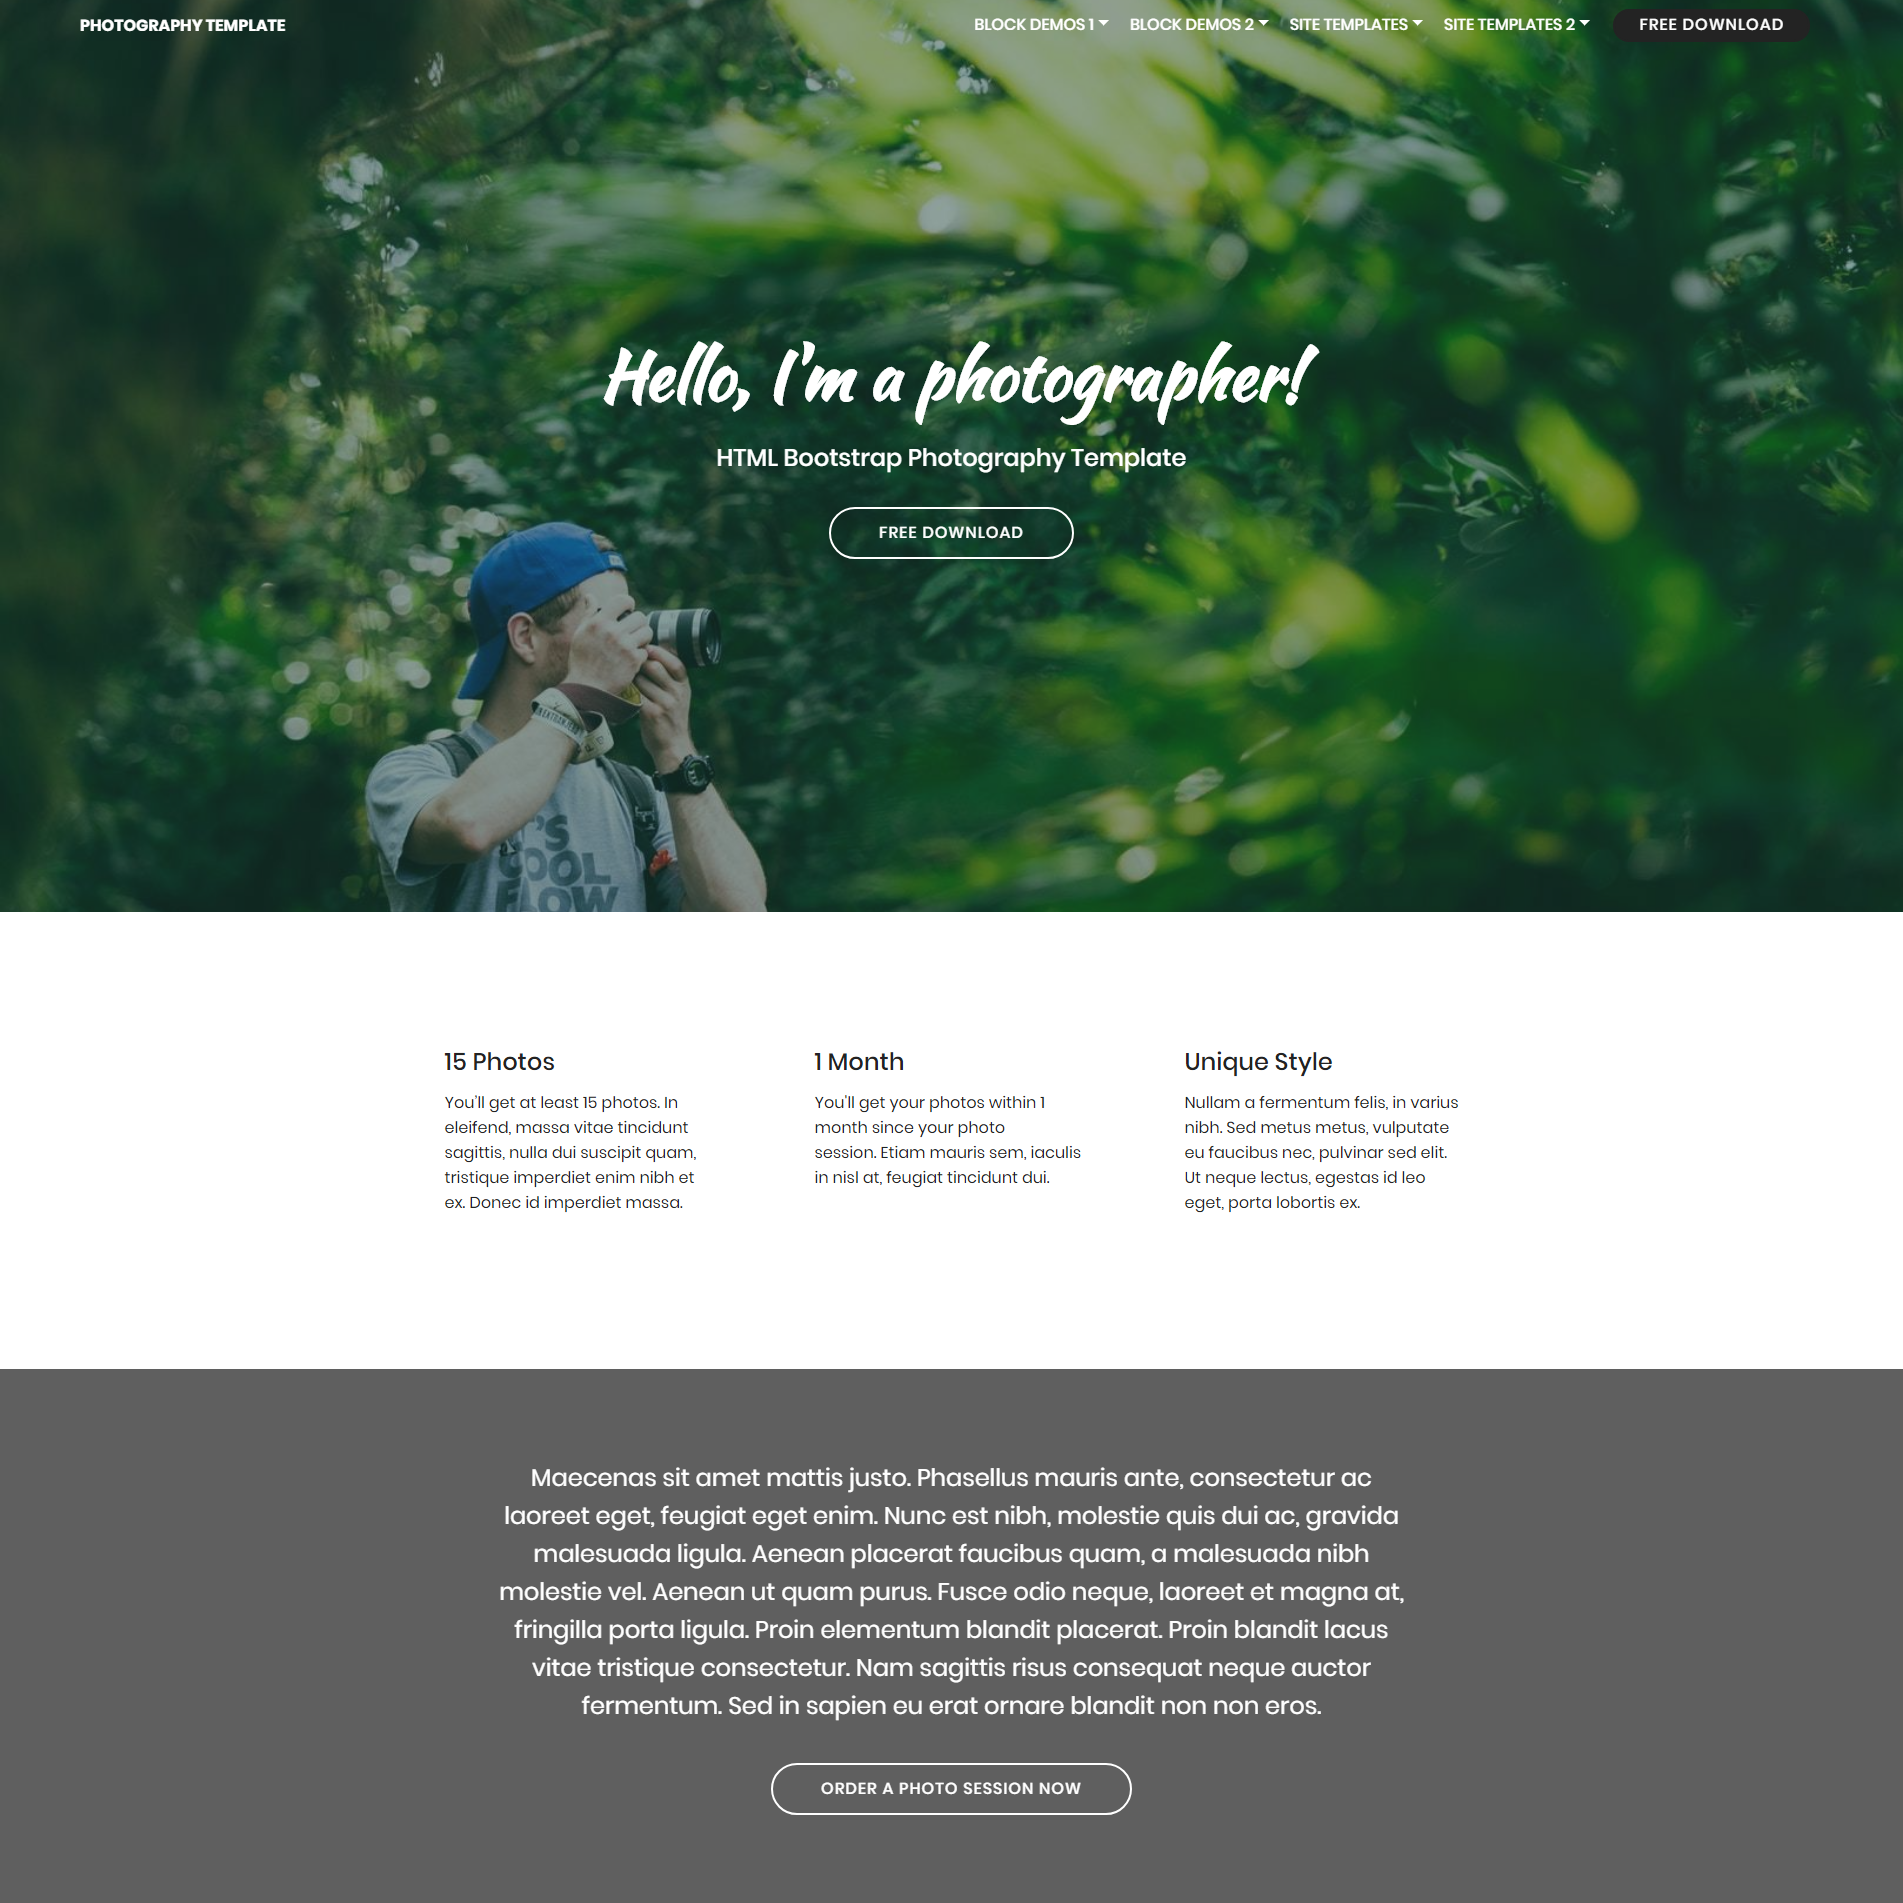 HTML5 Bootstrap Photography Templates